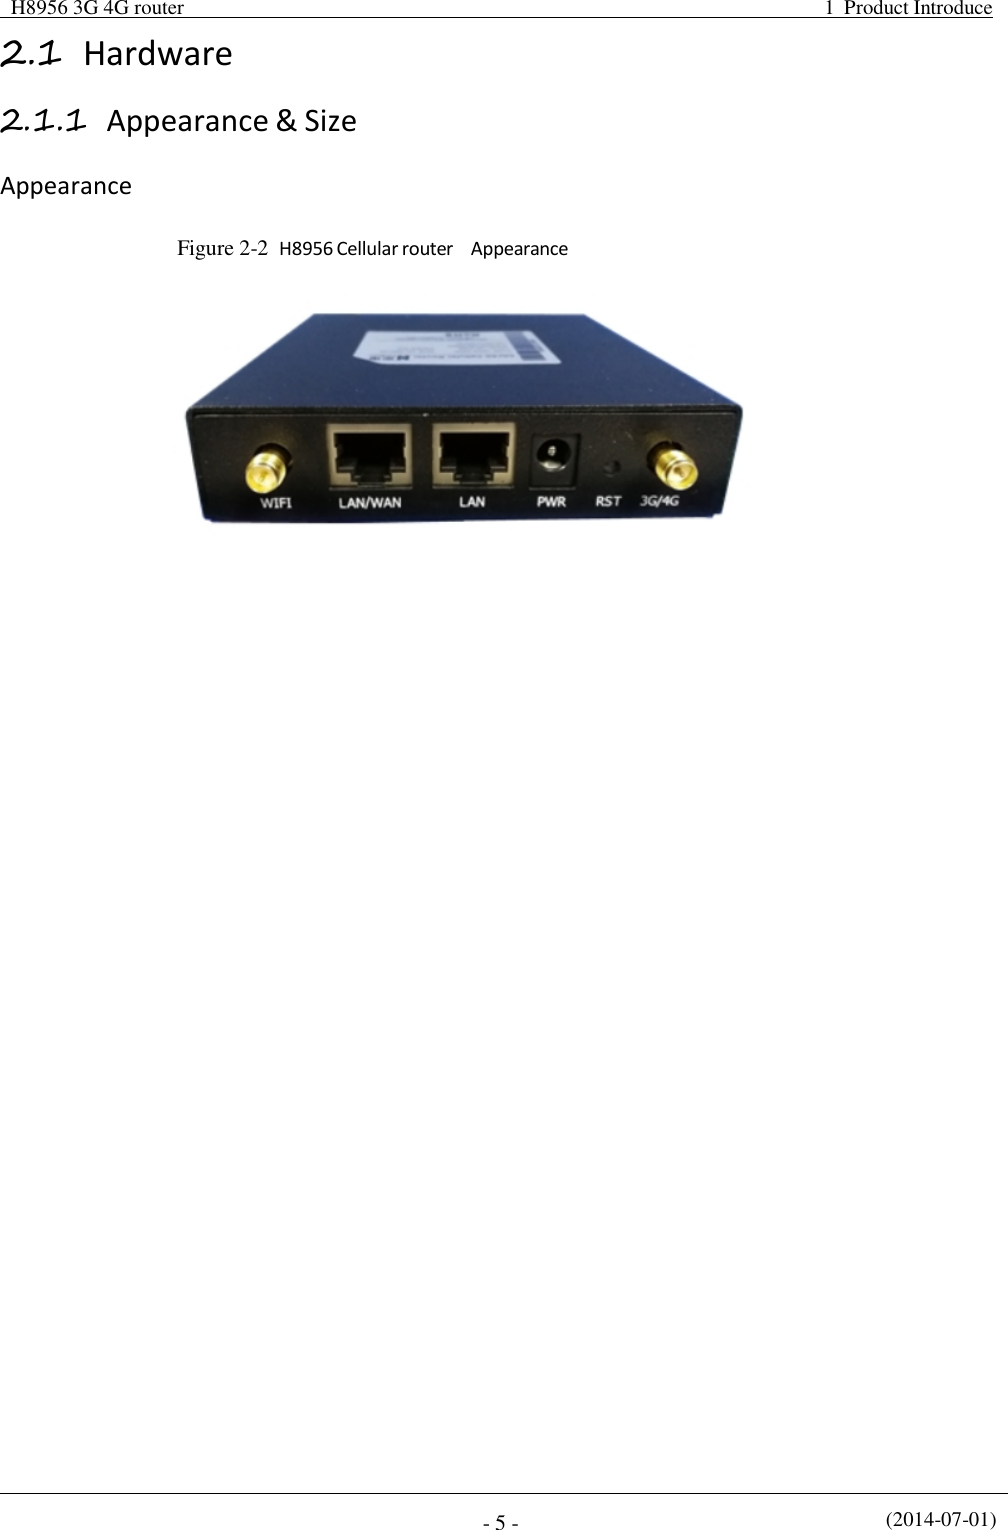  H8956 3G 4G router  1  Product Introduce (2014-07-01) - 5 -2.1 Hardware 2.1.1 Appearance &amp; Size Appearance Figure 2-2  H8956 Cellular router    Appearance 